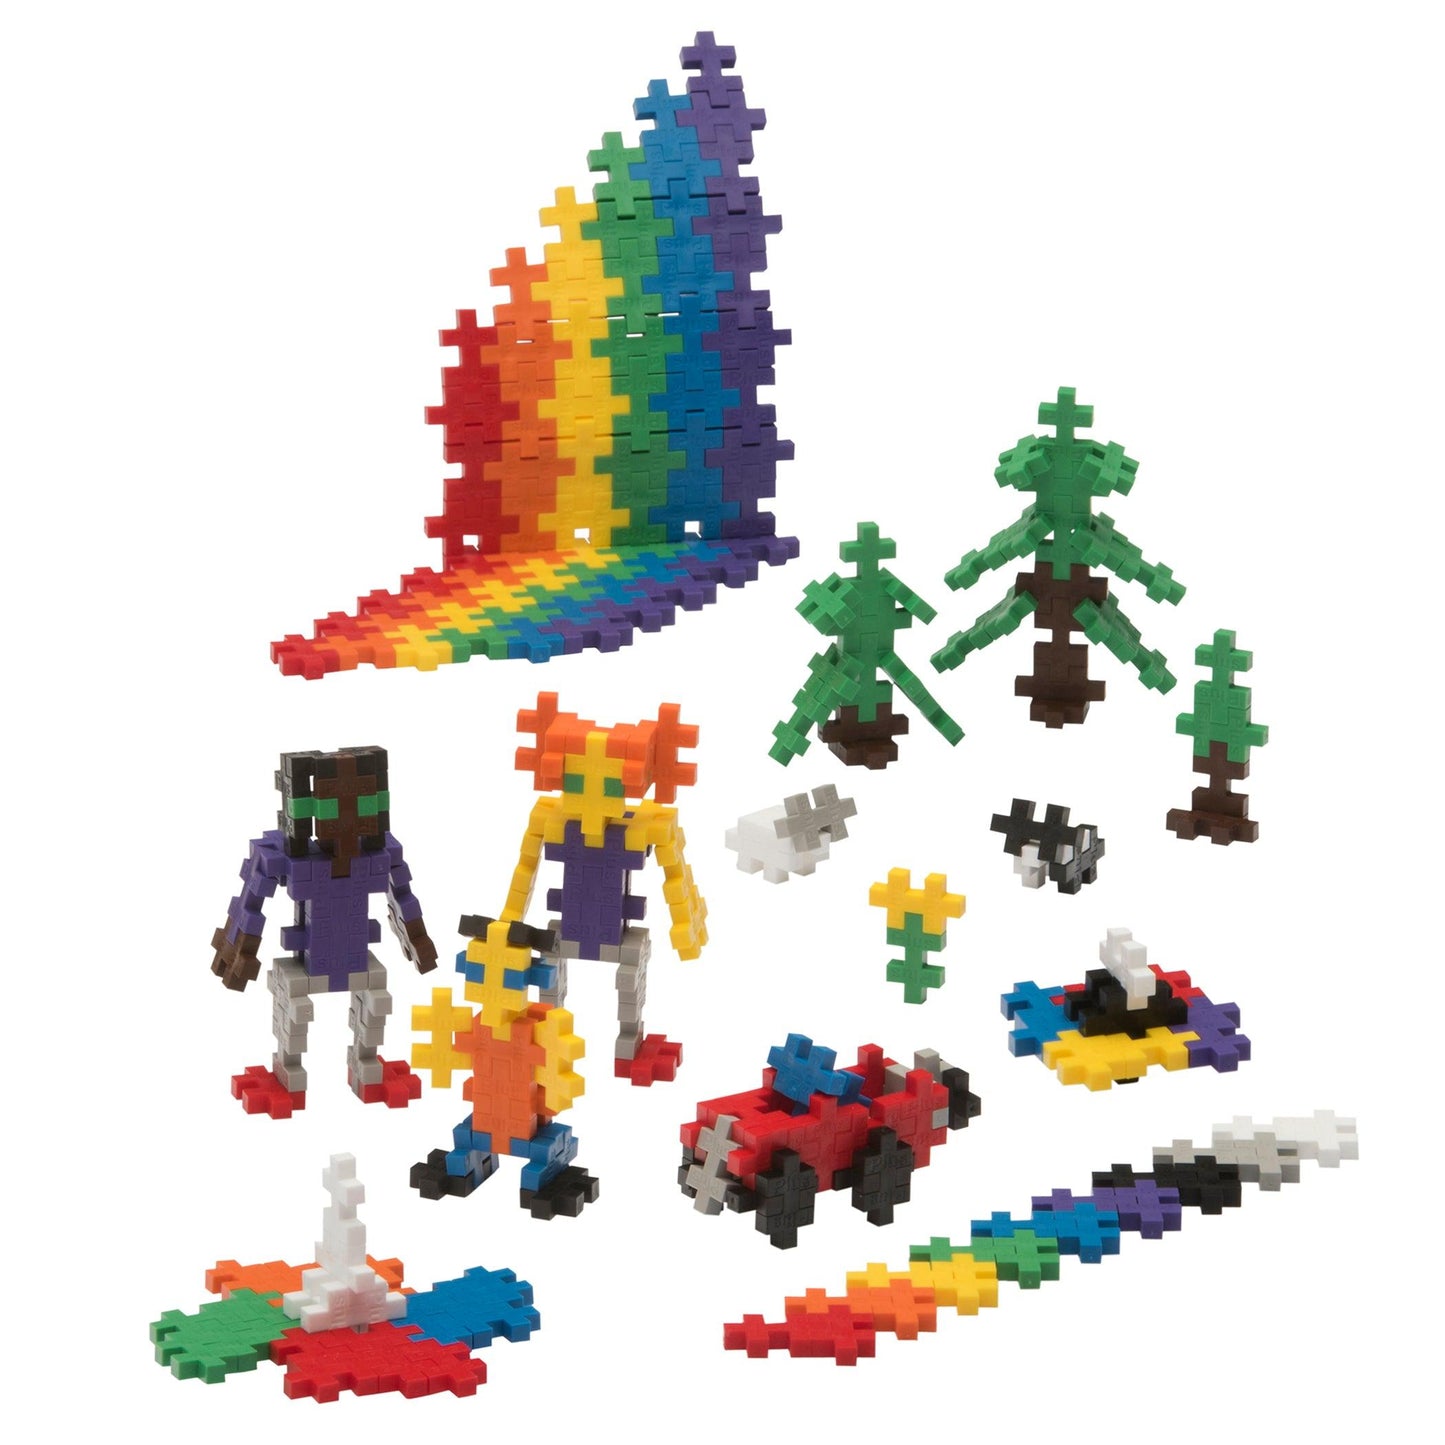 Plus-Plus® School Set, Assorted Colors, 3600 Pieces with 12 Baseplates - Loomini